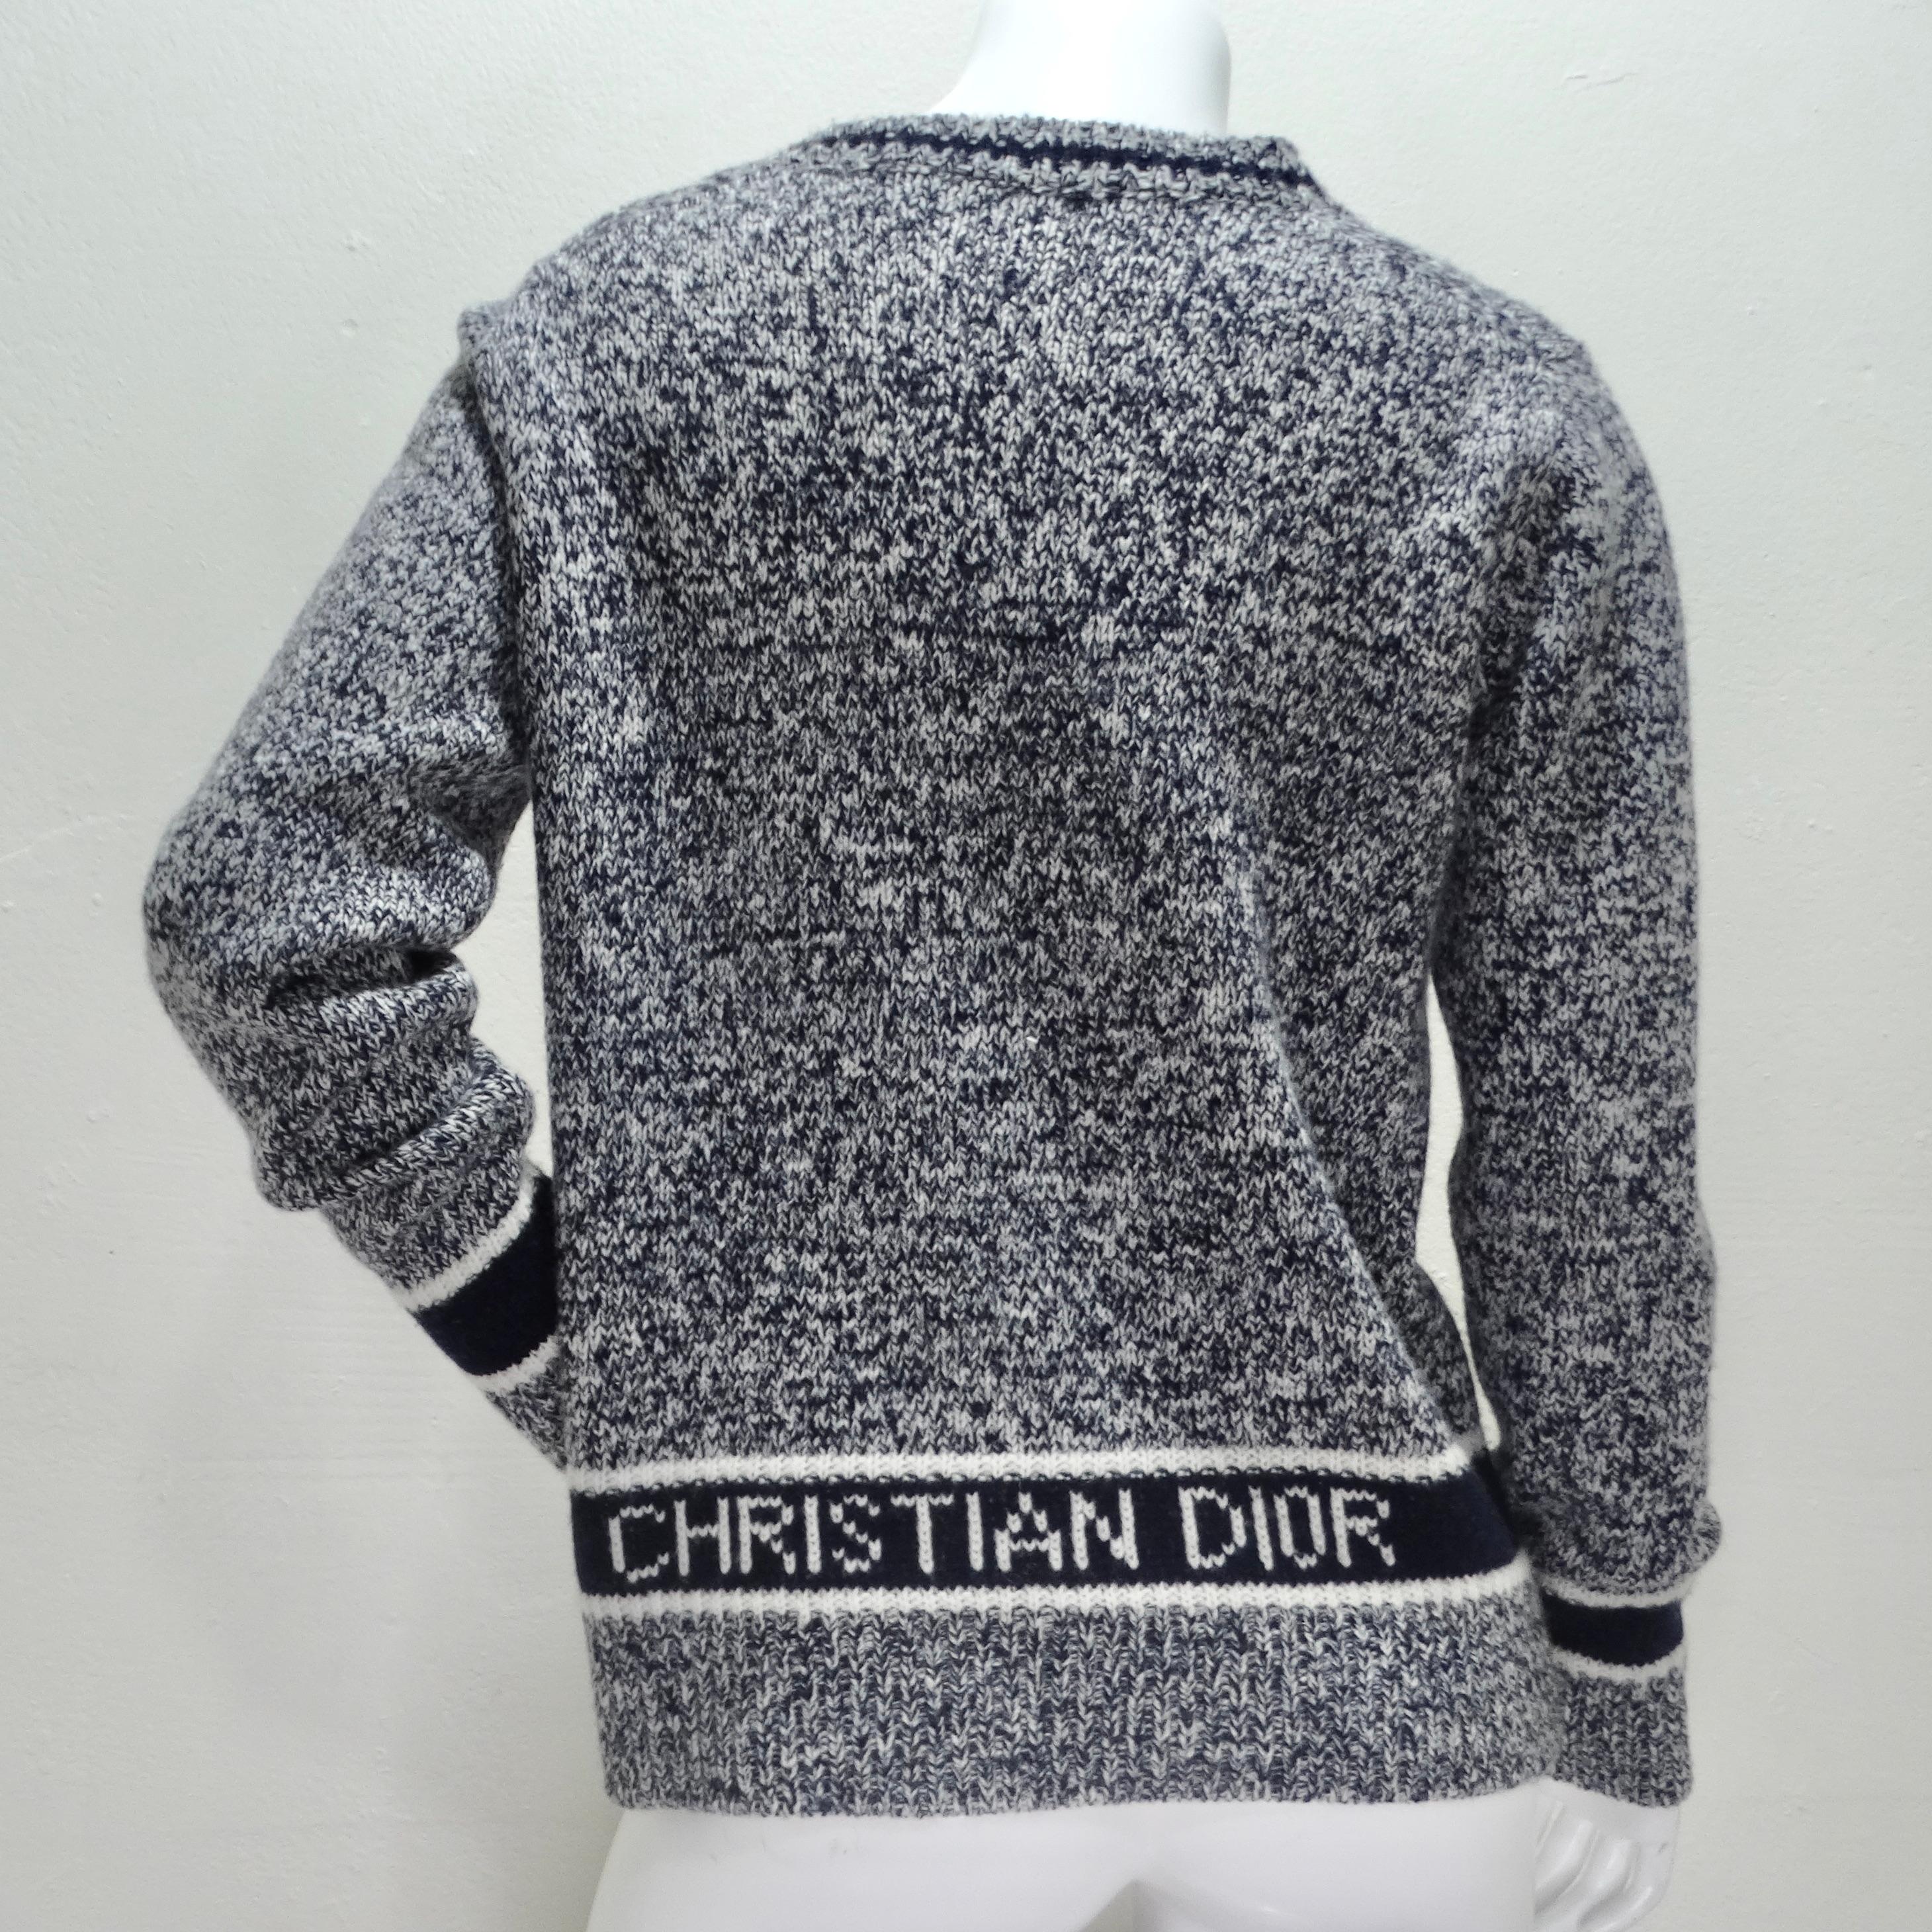 Introducing the Christian Dior Cashmere V-Neck Sweater – a luxurious and timeless piece that exudes sophistication and style. Crafted from a white and navy specked knit blend of cashmere and wool, this sweater offers both warmth and comfort with a